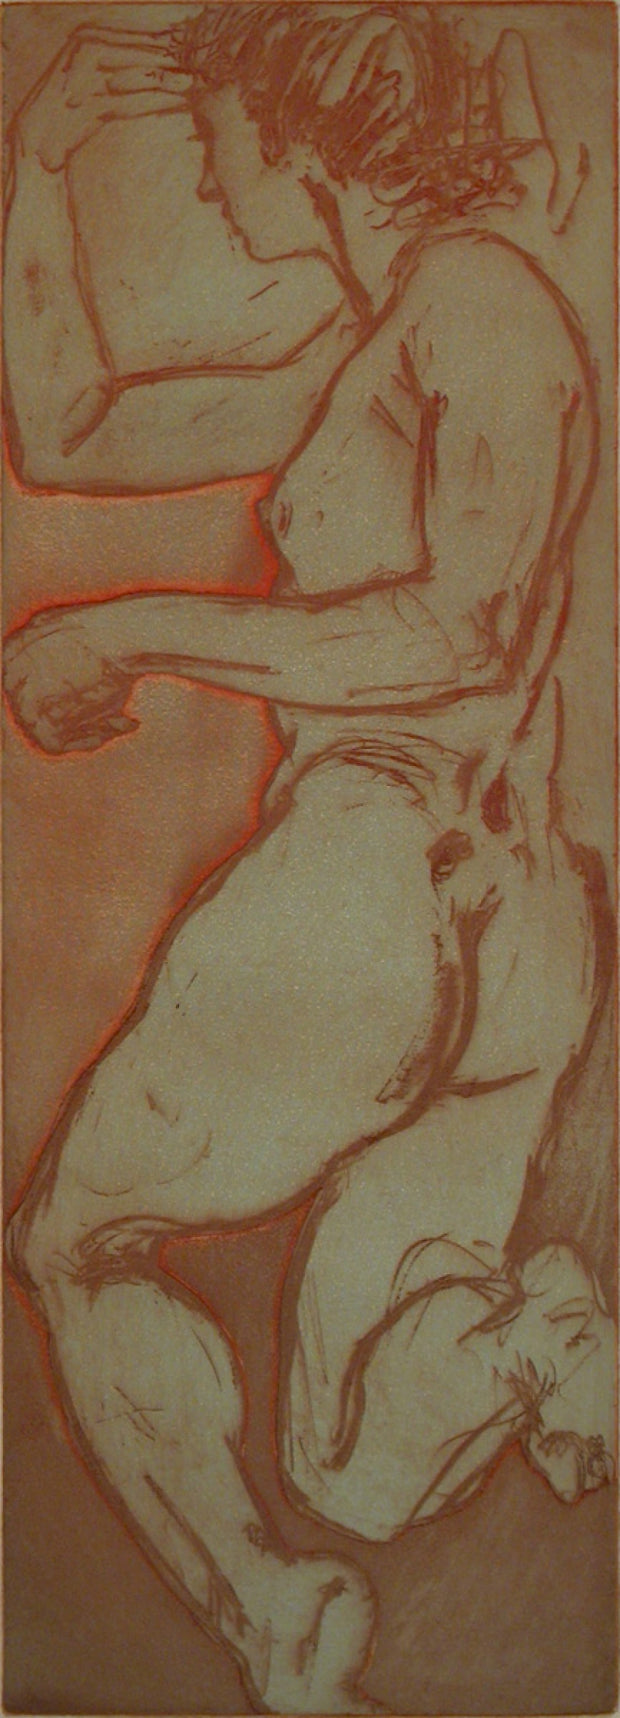 Floating World Suite: Figure 13 by Mary Farrell - Davidson Galleries